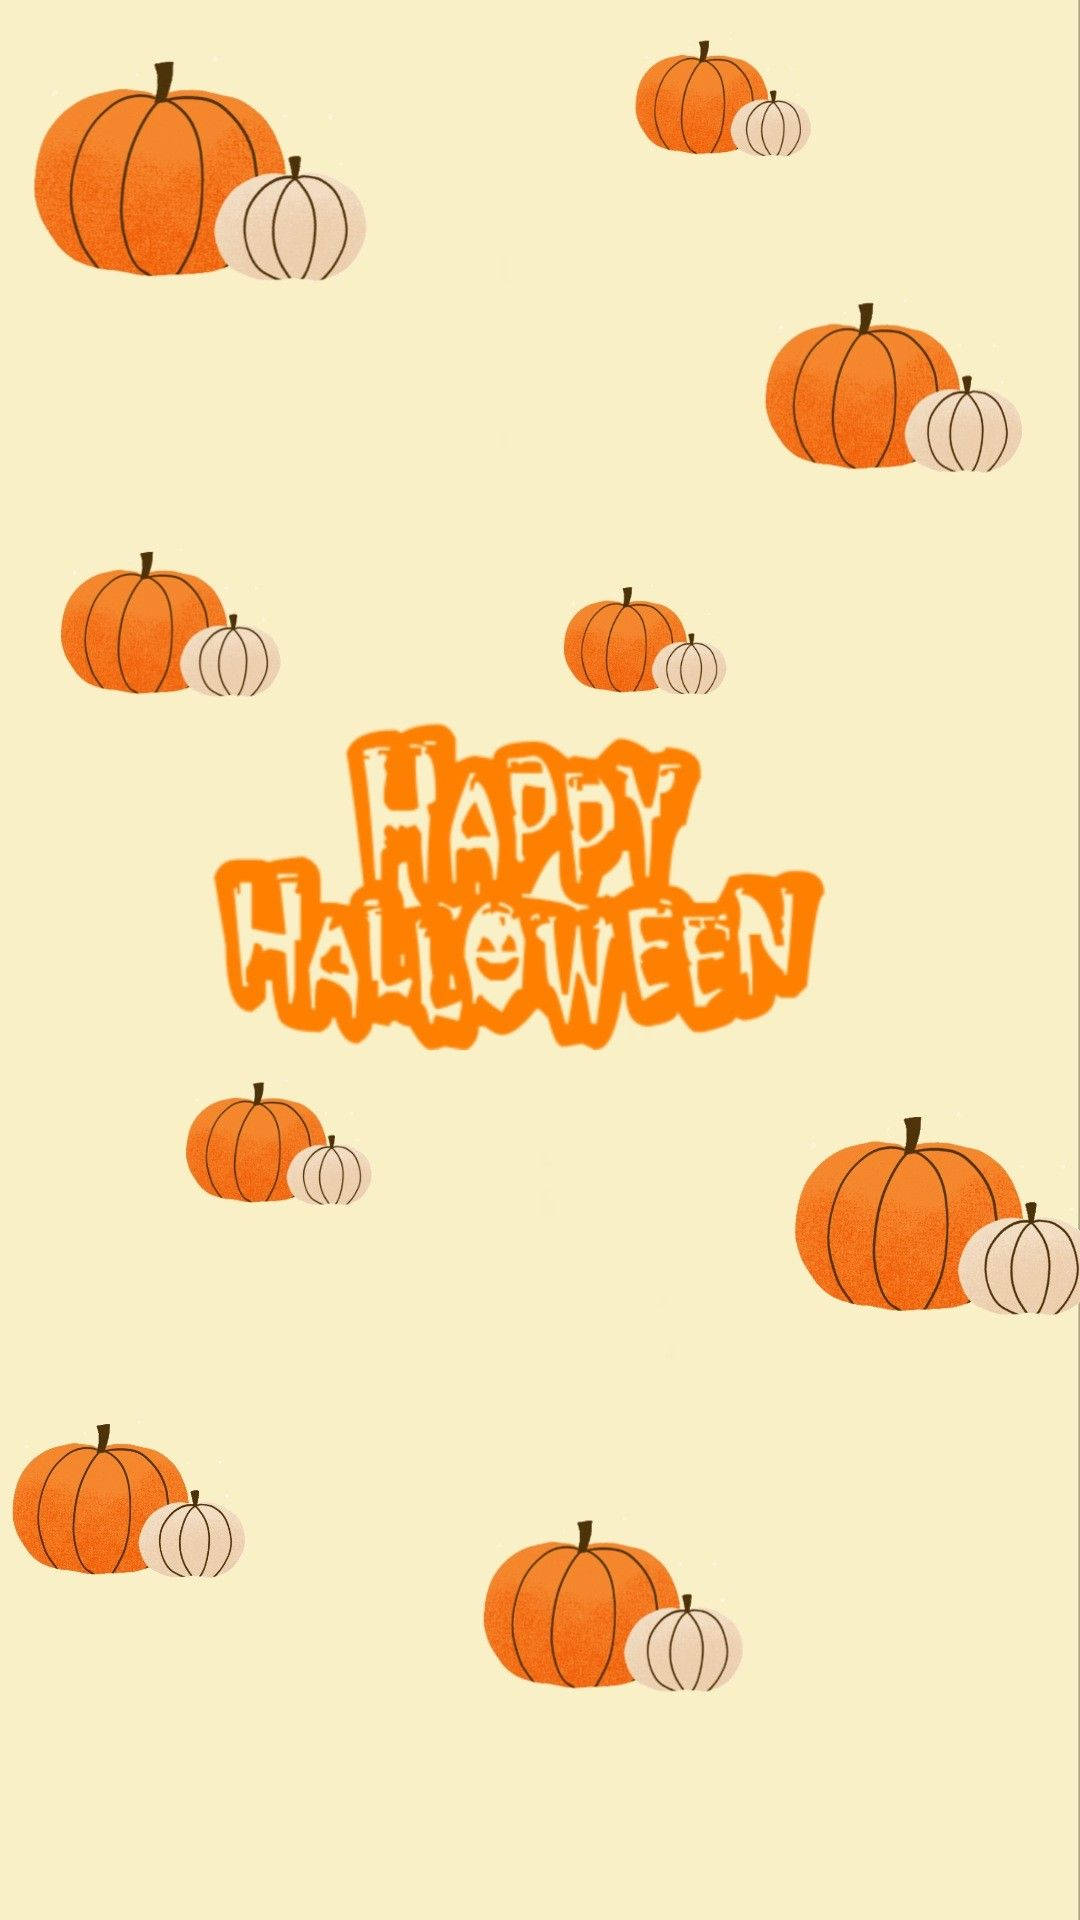 Get ready for a spooky and fun Happy Halloween! Wallpaper